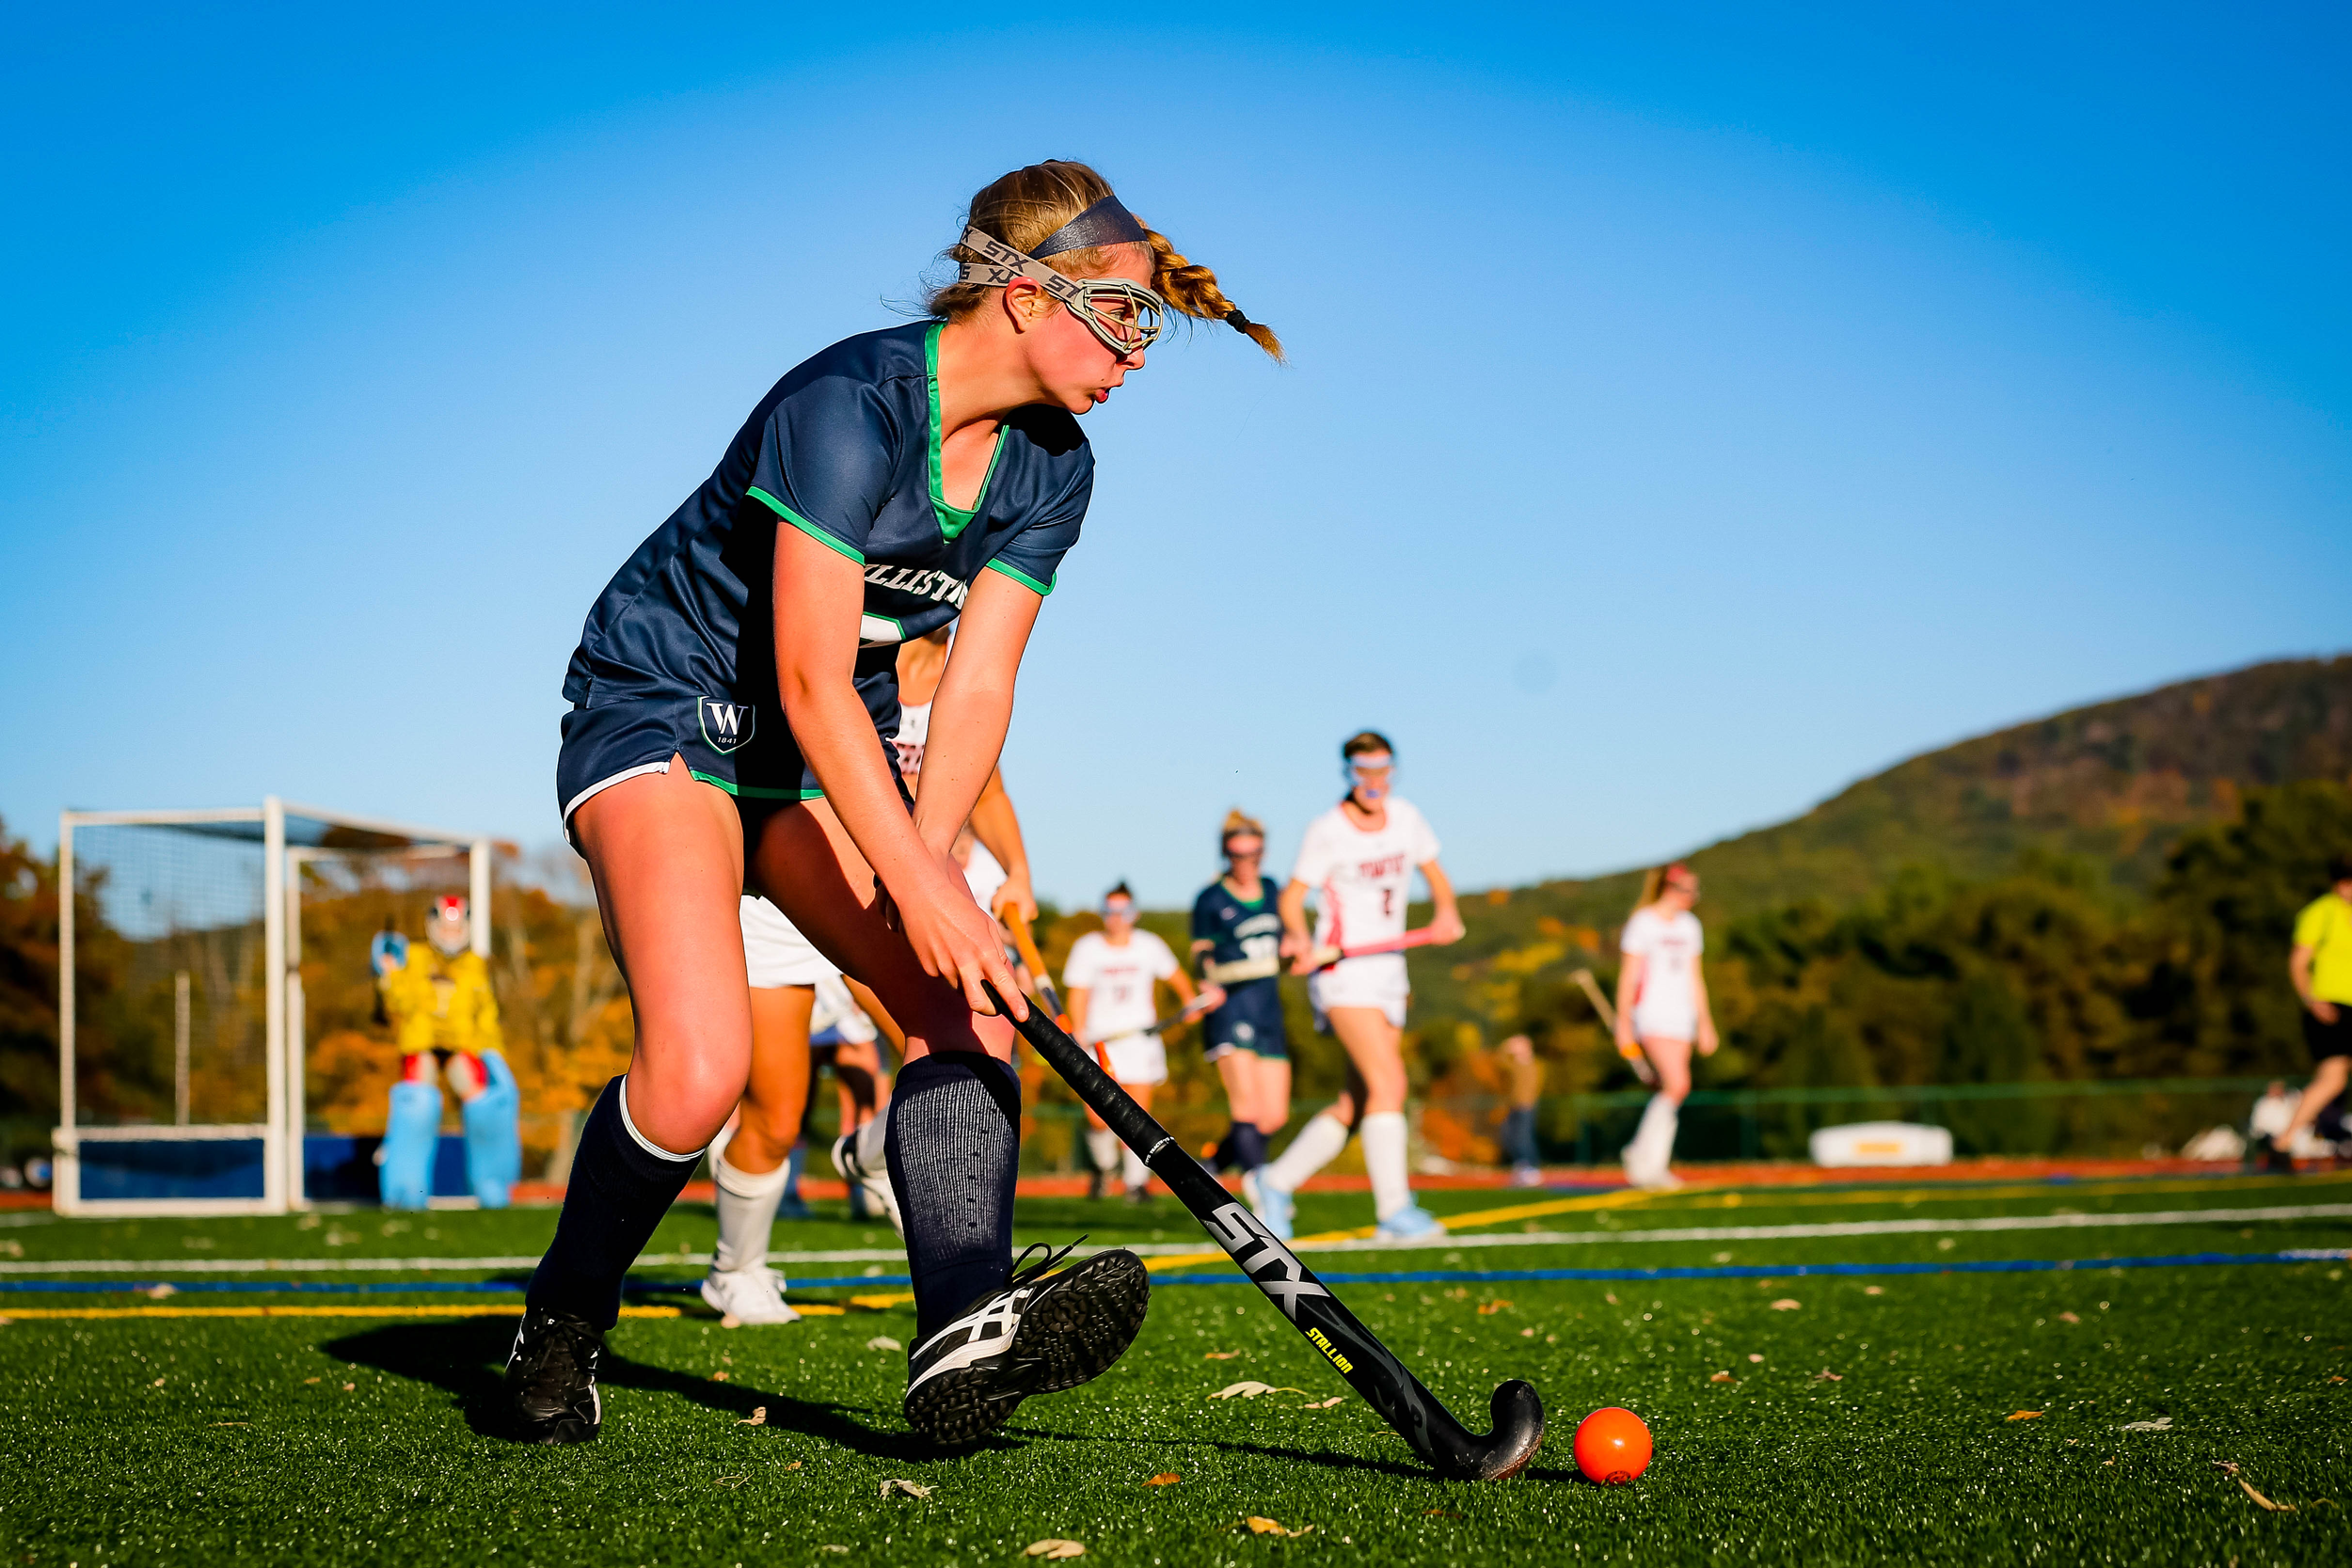 A close up shot of a Williston field hockey player during a match